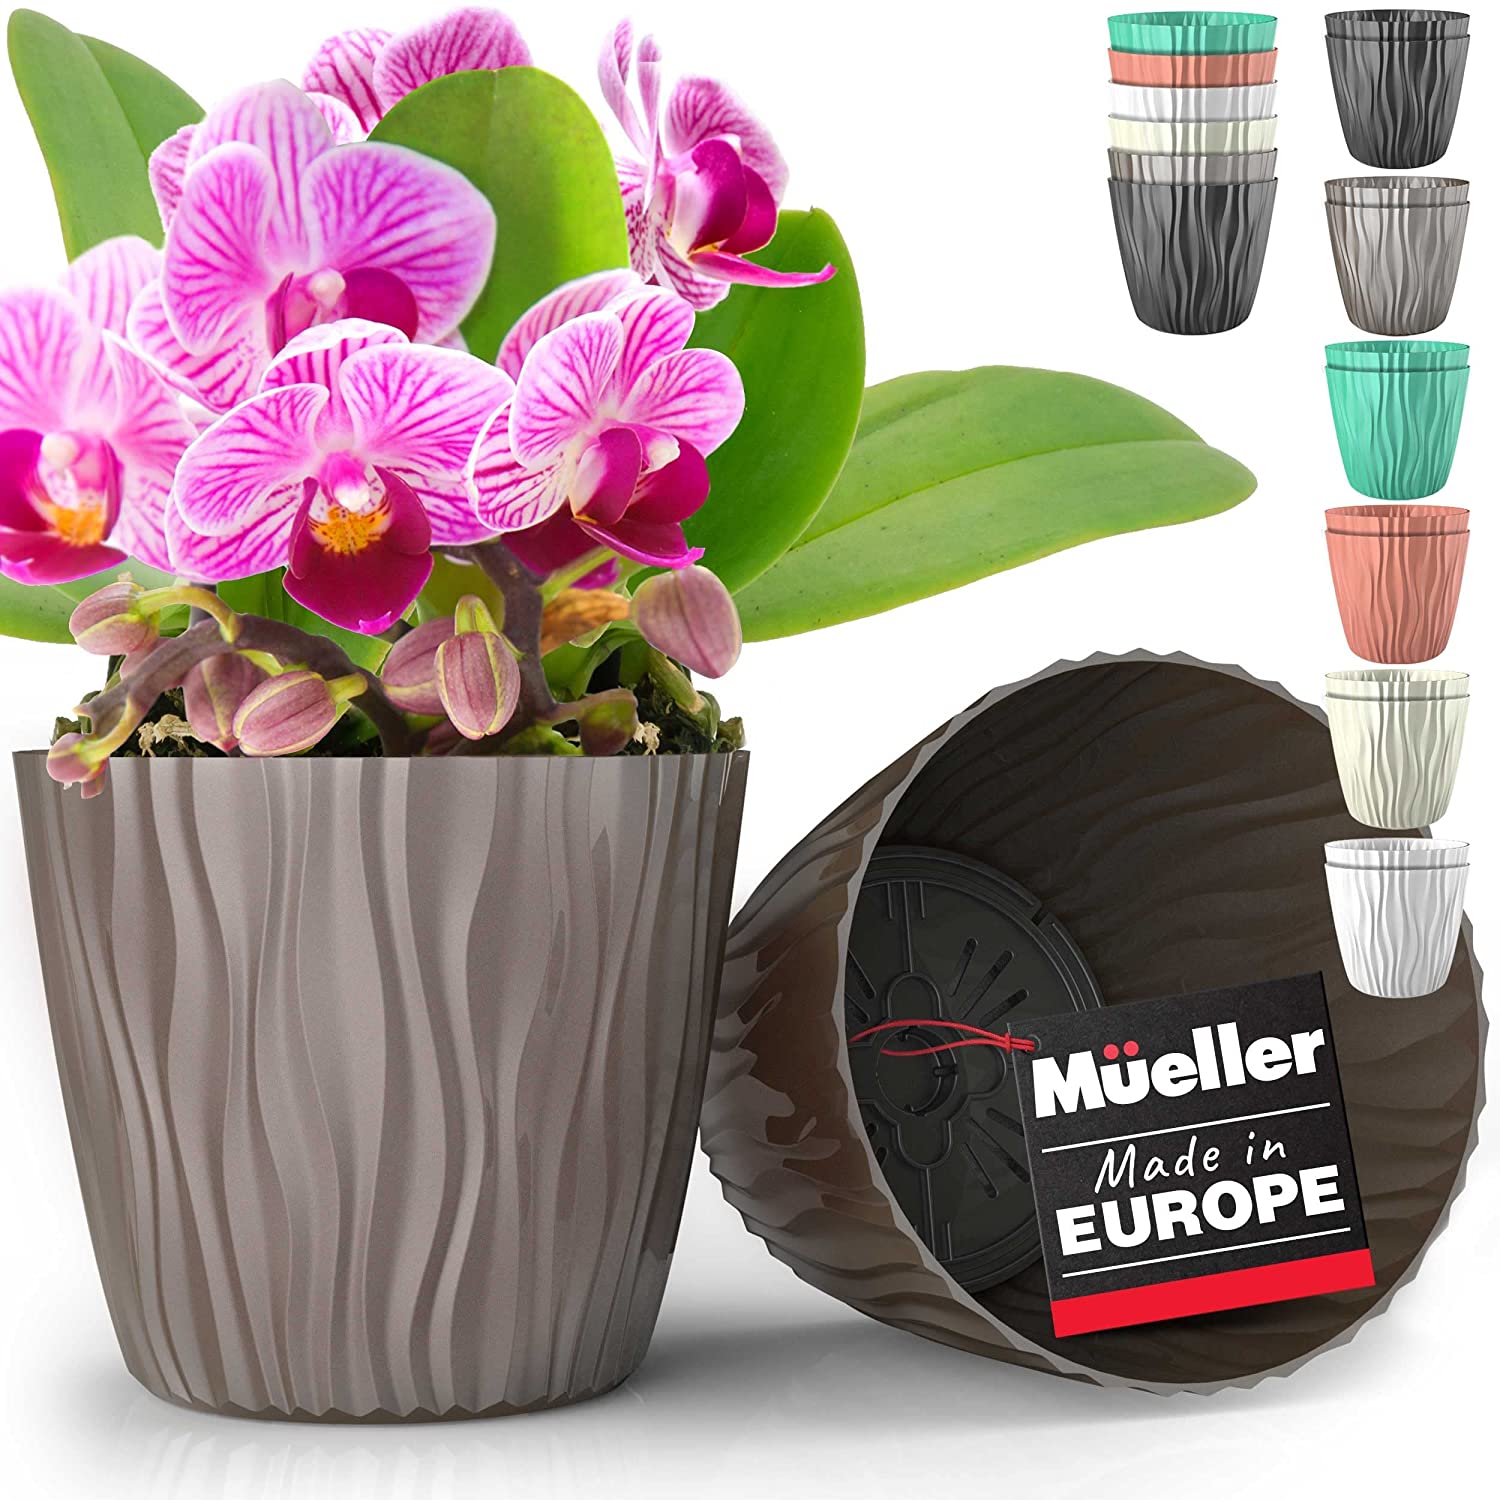 muellerhome_Decorative-Plant-and-Flower-Pots-Small-2-Piece-Mocca-Set